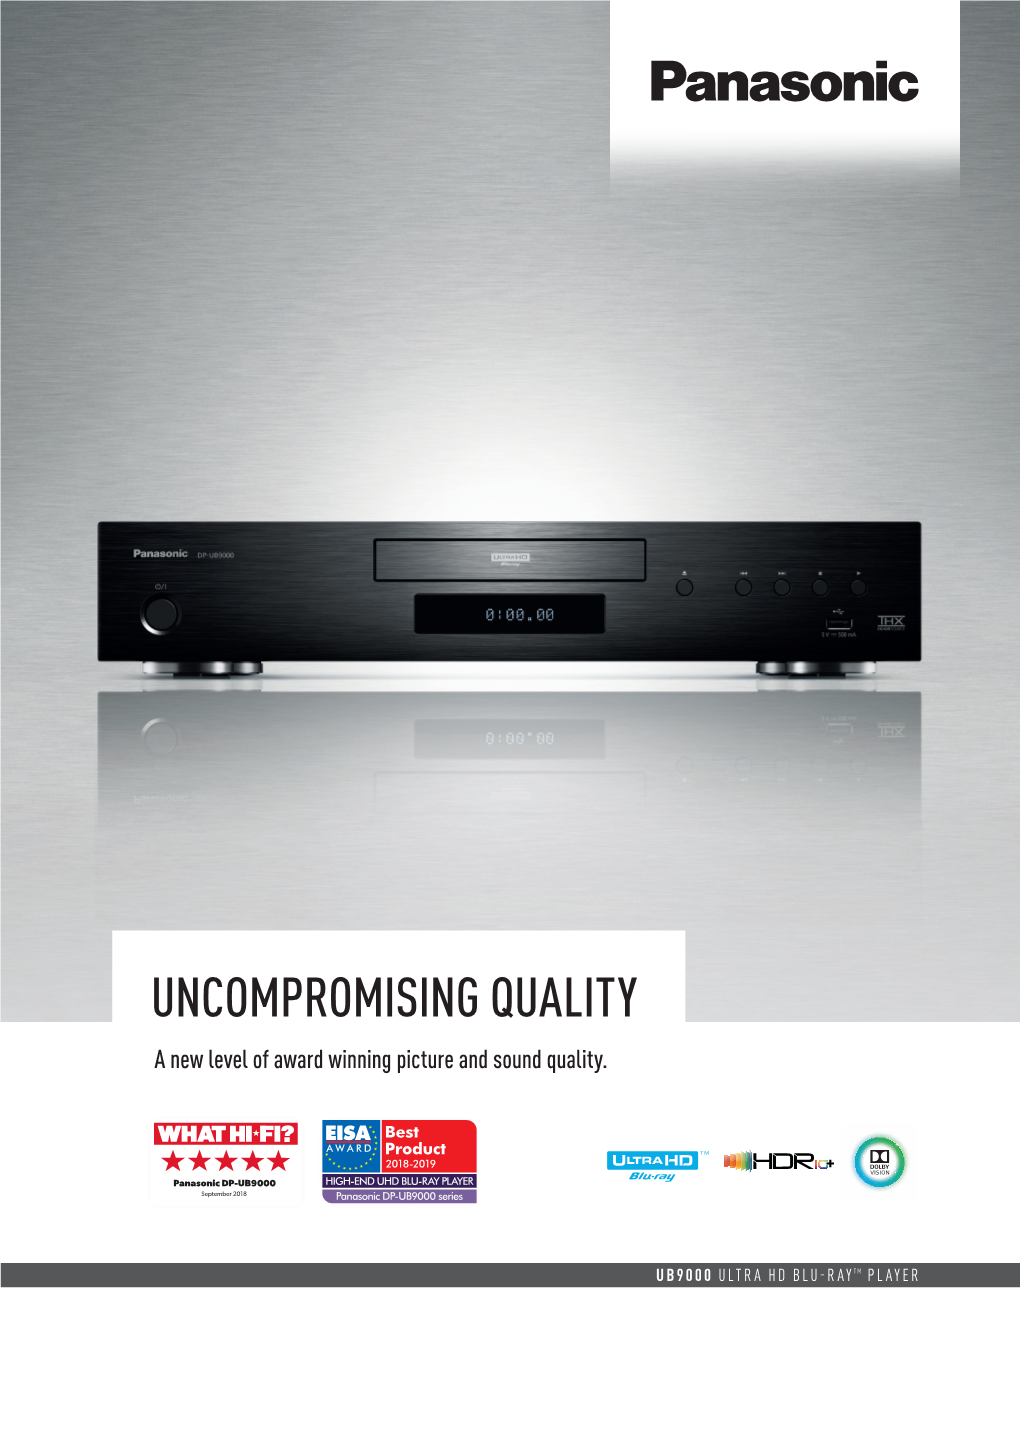 UNCOMPROMISING QUALITY a New Level of Award Winning Picture and Sound Quality